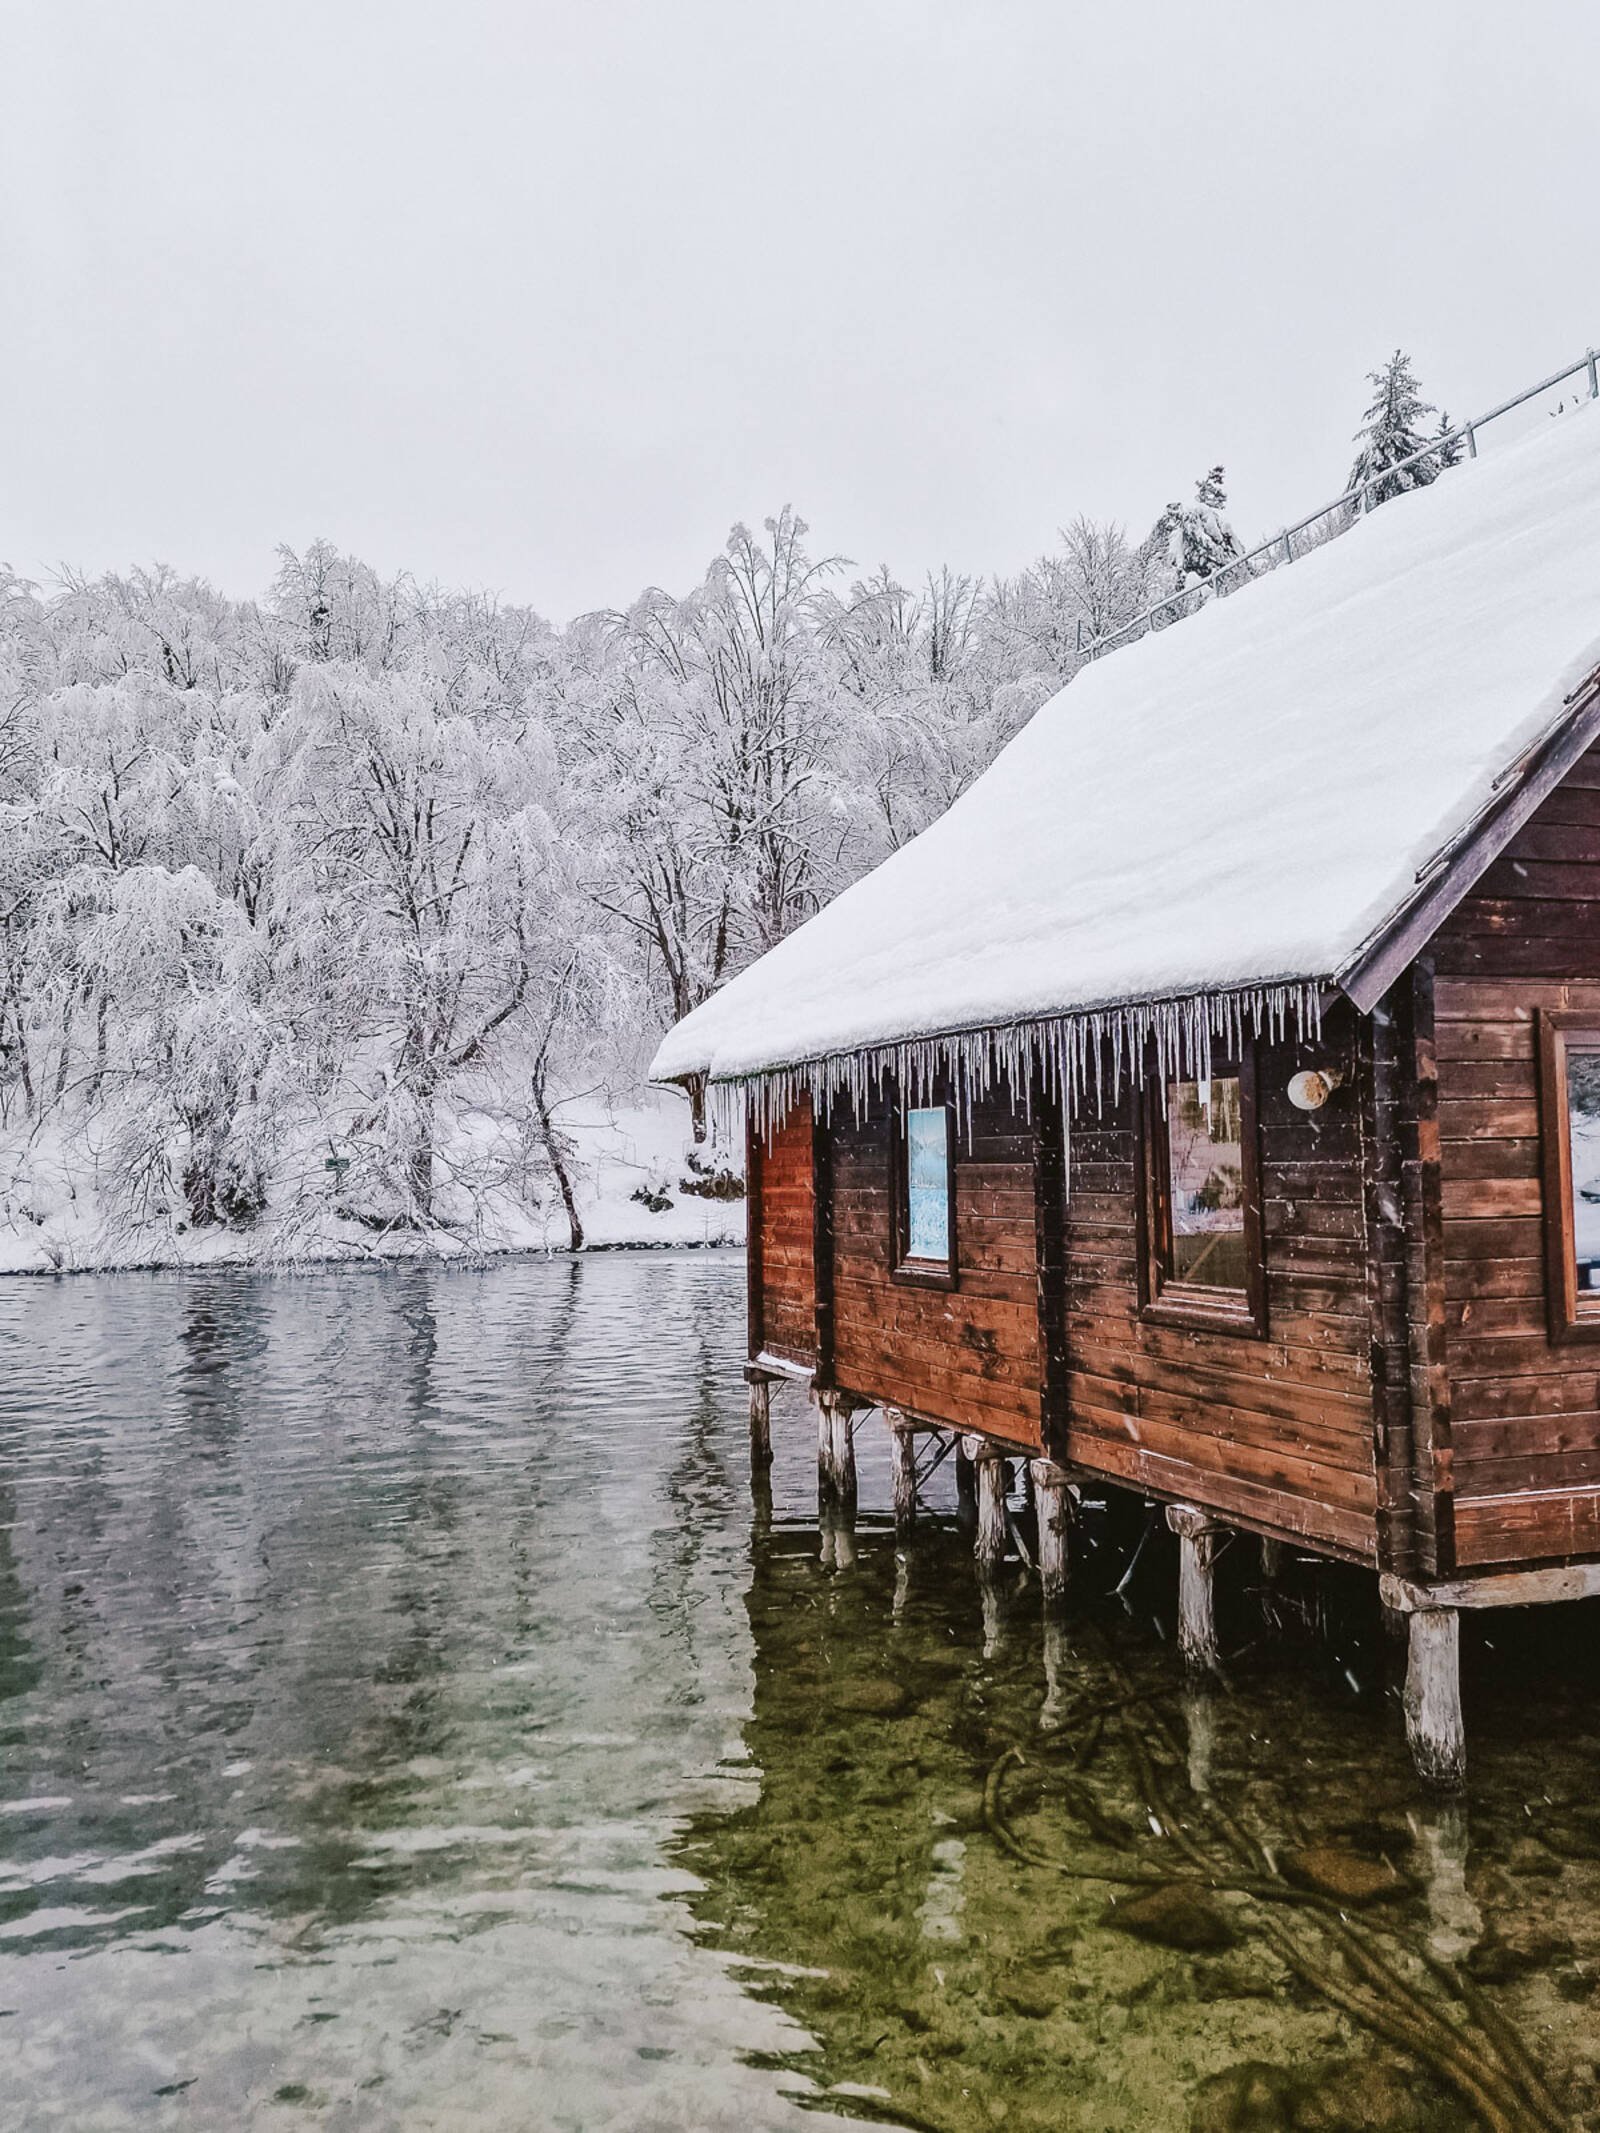 A wooden boat house on stilts above the lake with a snow covered roof and icicles hanging off the roof with trees on the water bank in the background